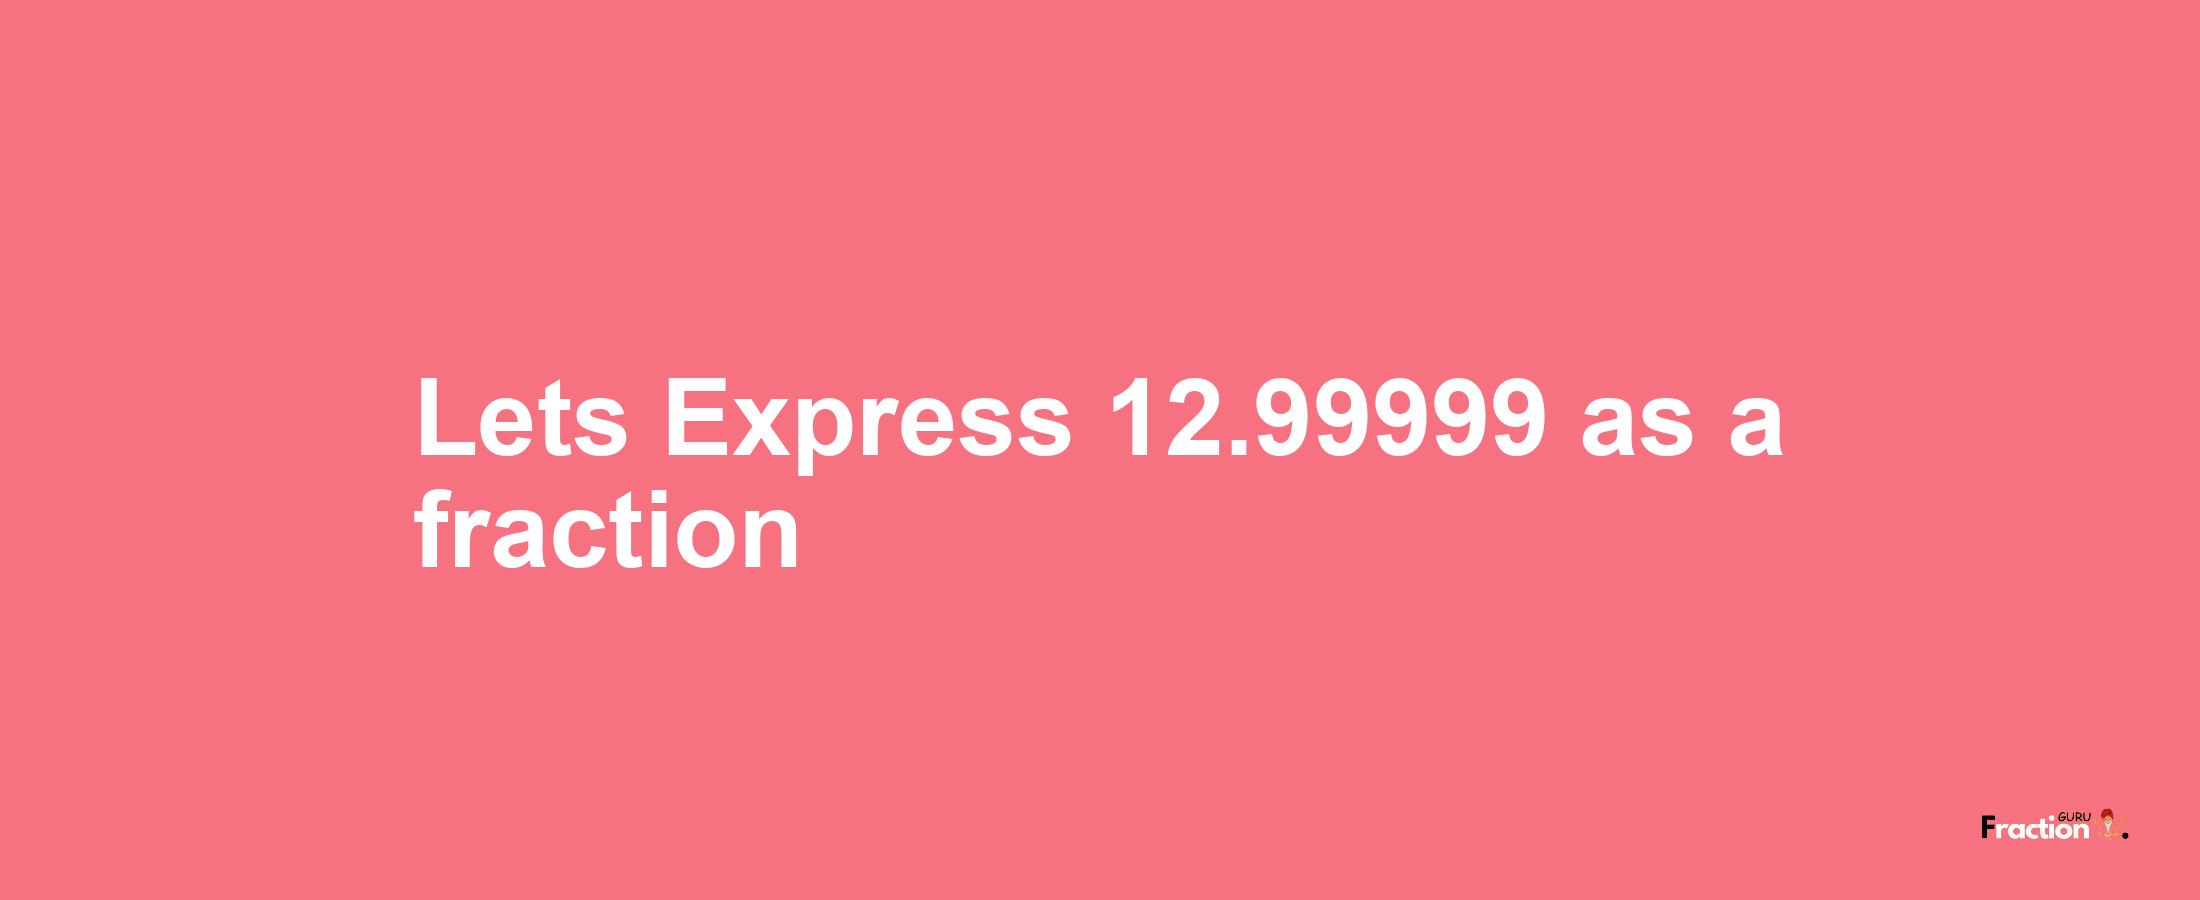 Lets Express 12.99999 as afraction